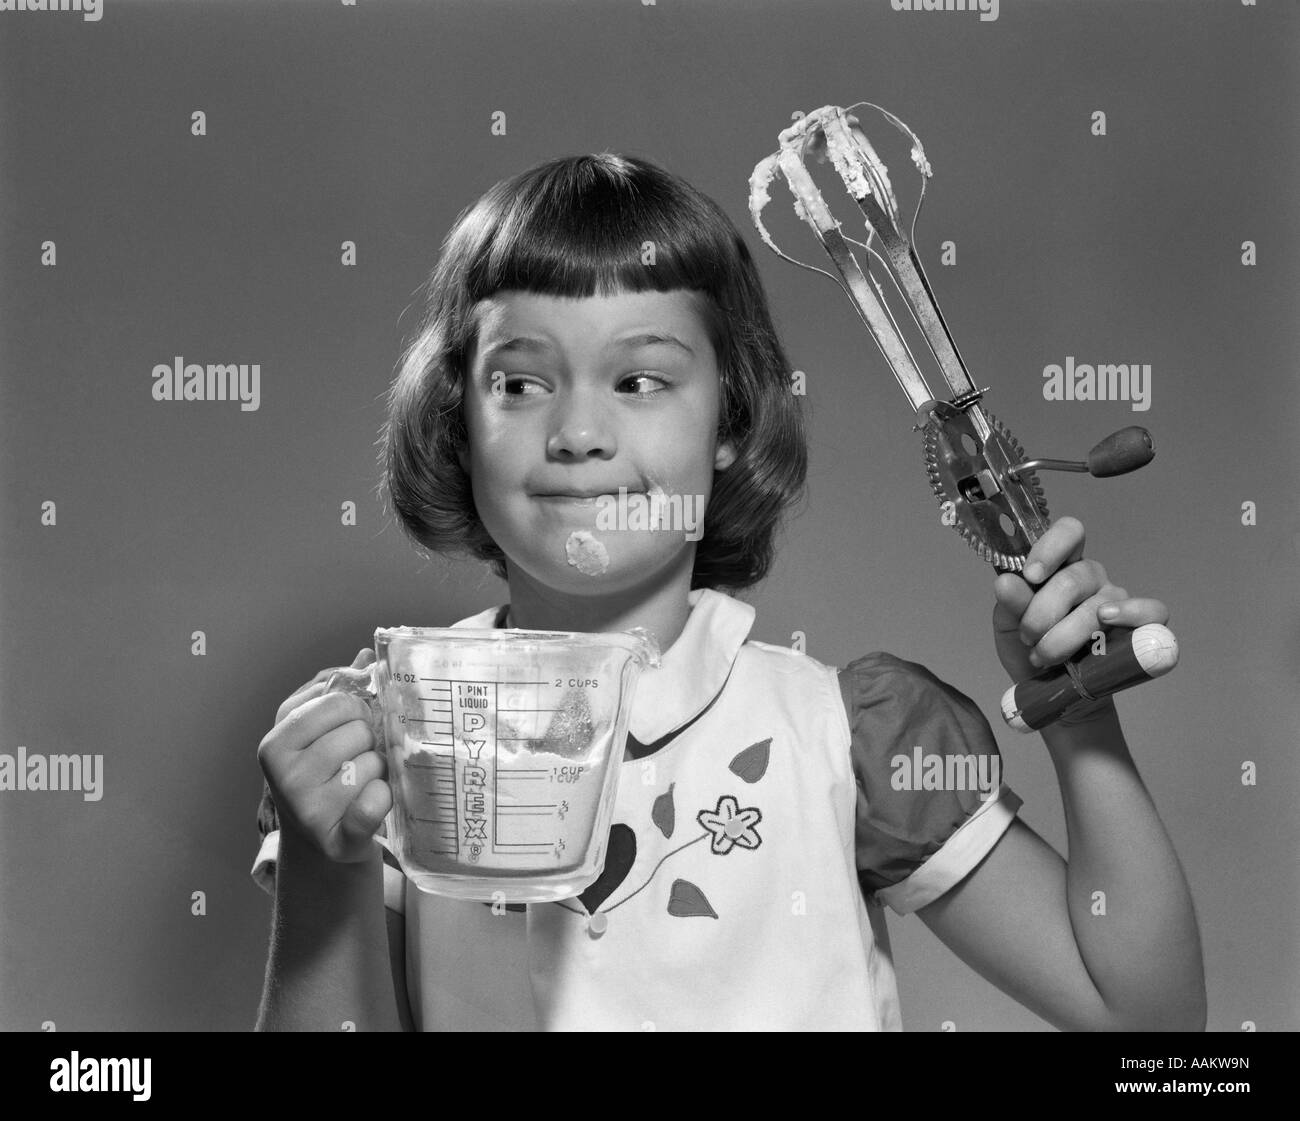 1950s SMILING GIRL HOLDING MEASURING CUP EGG BEATERS COOKING MIXING FOOD ON FACE Stock Photo